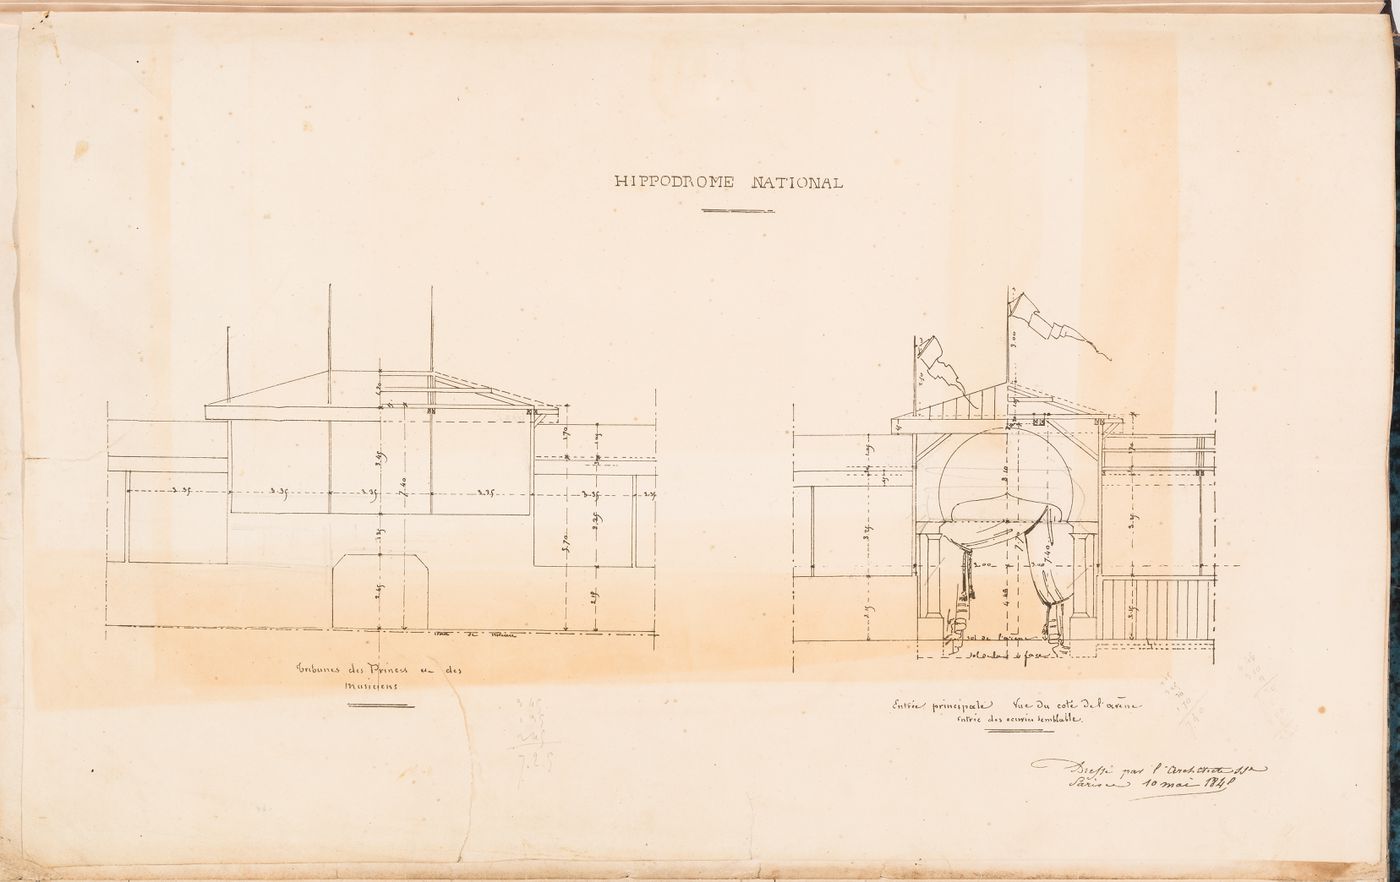 Hippodrome national, Paris: Sectional elevations for the princes' and musicians' grandstands and the principal entrance